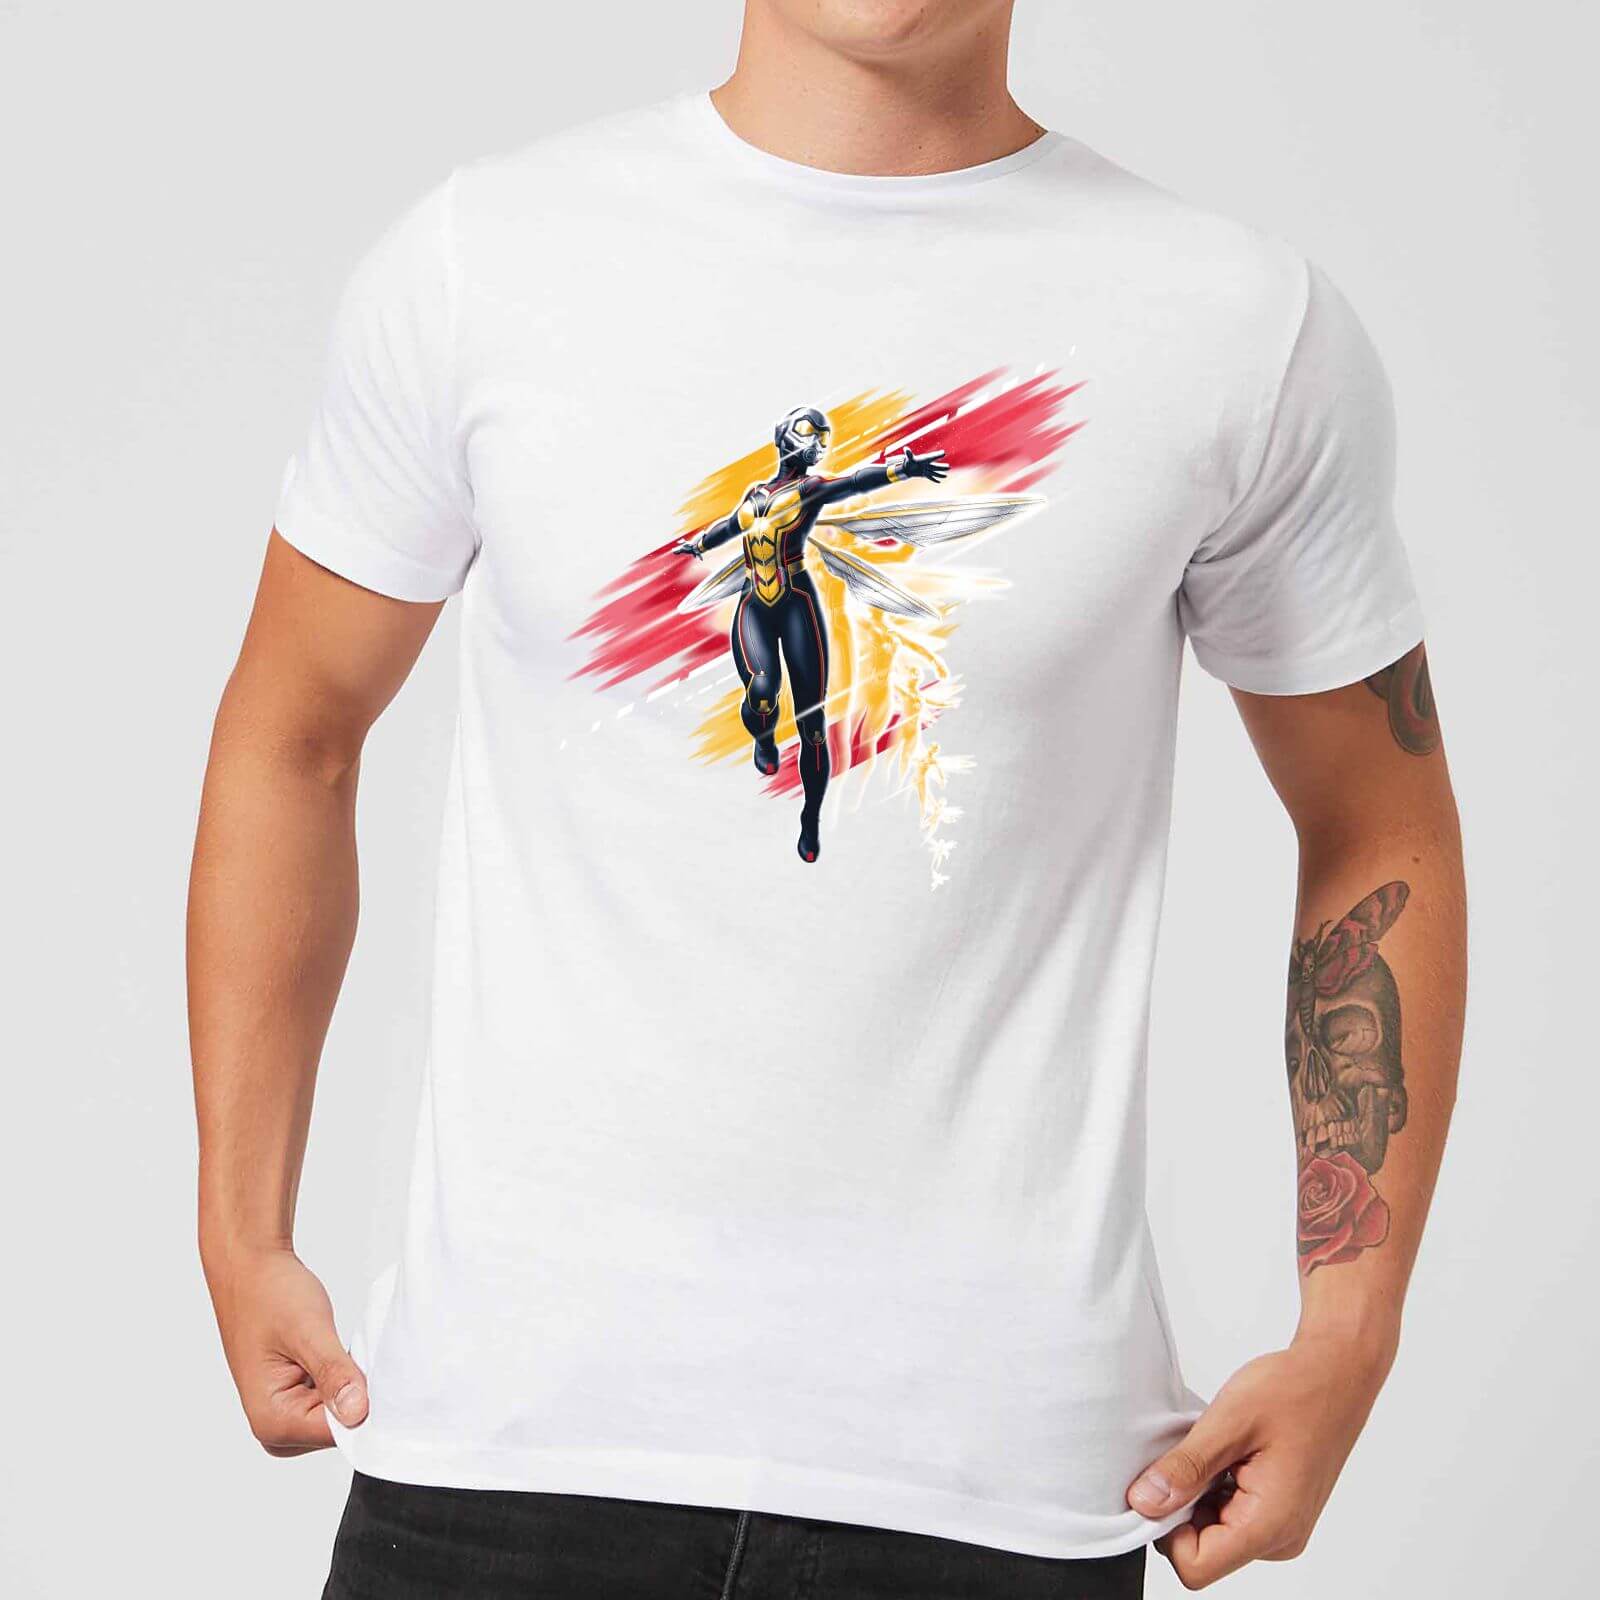 Ant-Man And The Wasp Brushed Herren T-Shirt - Weiß - S - Weiß